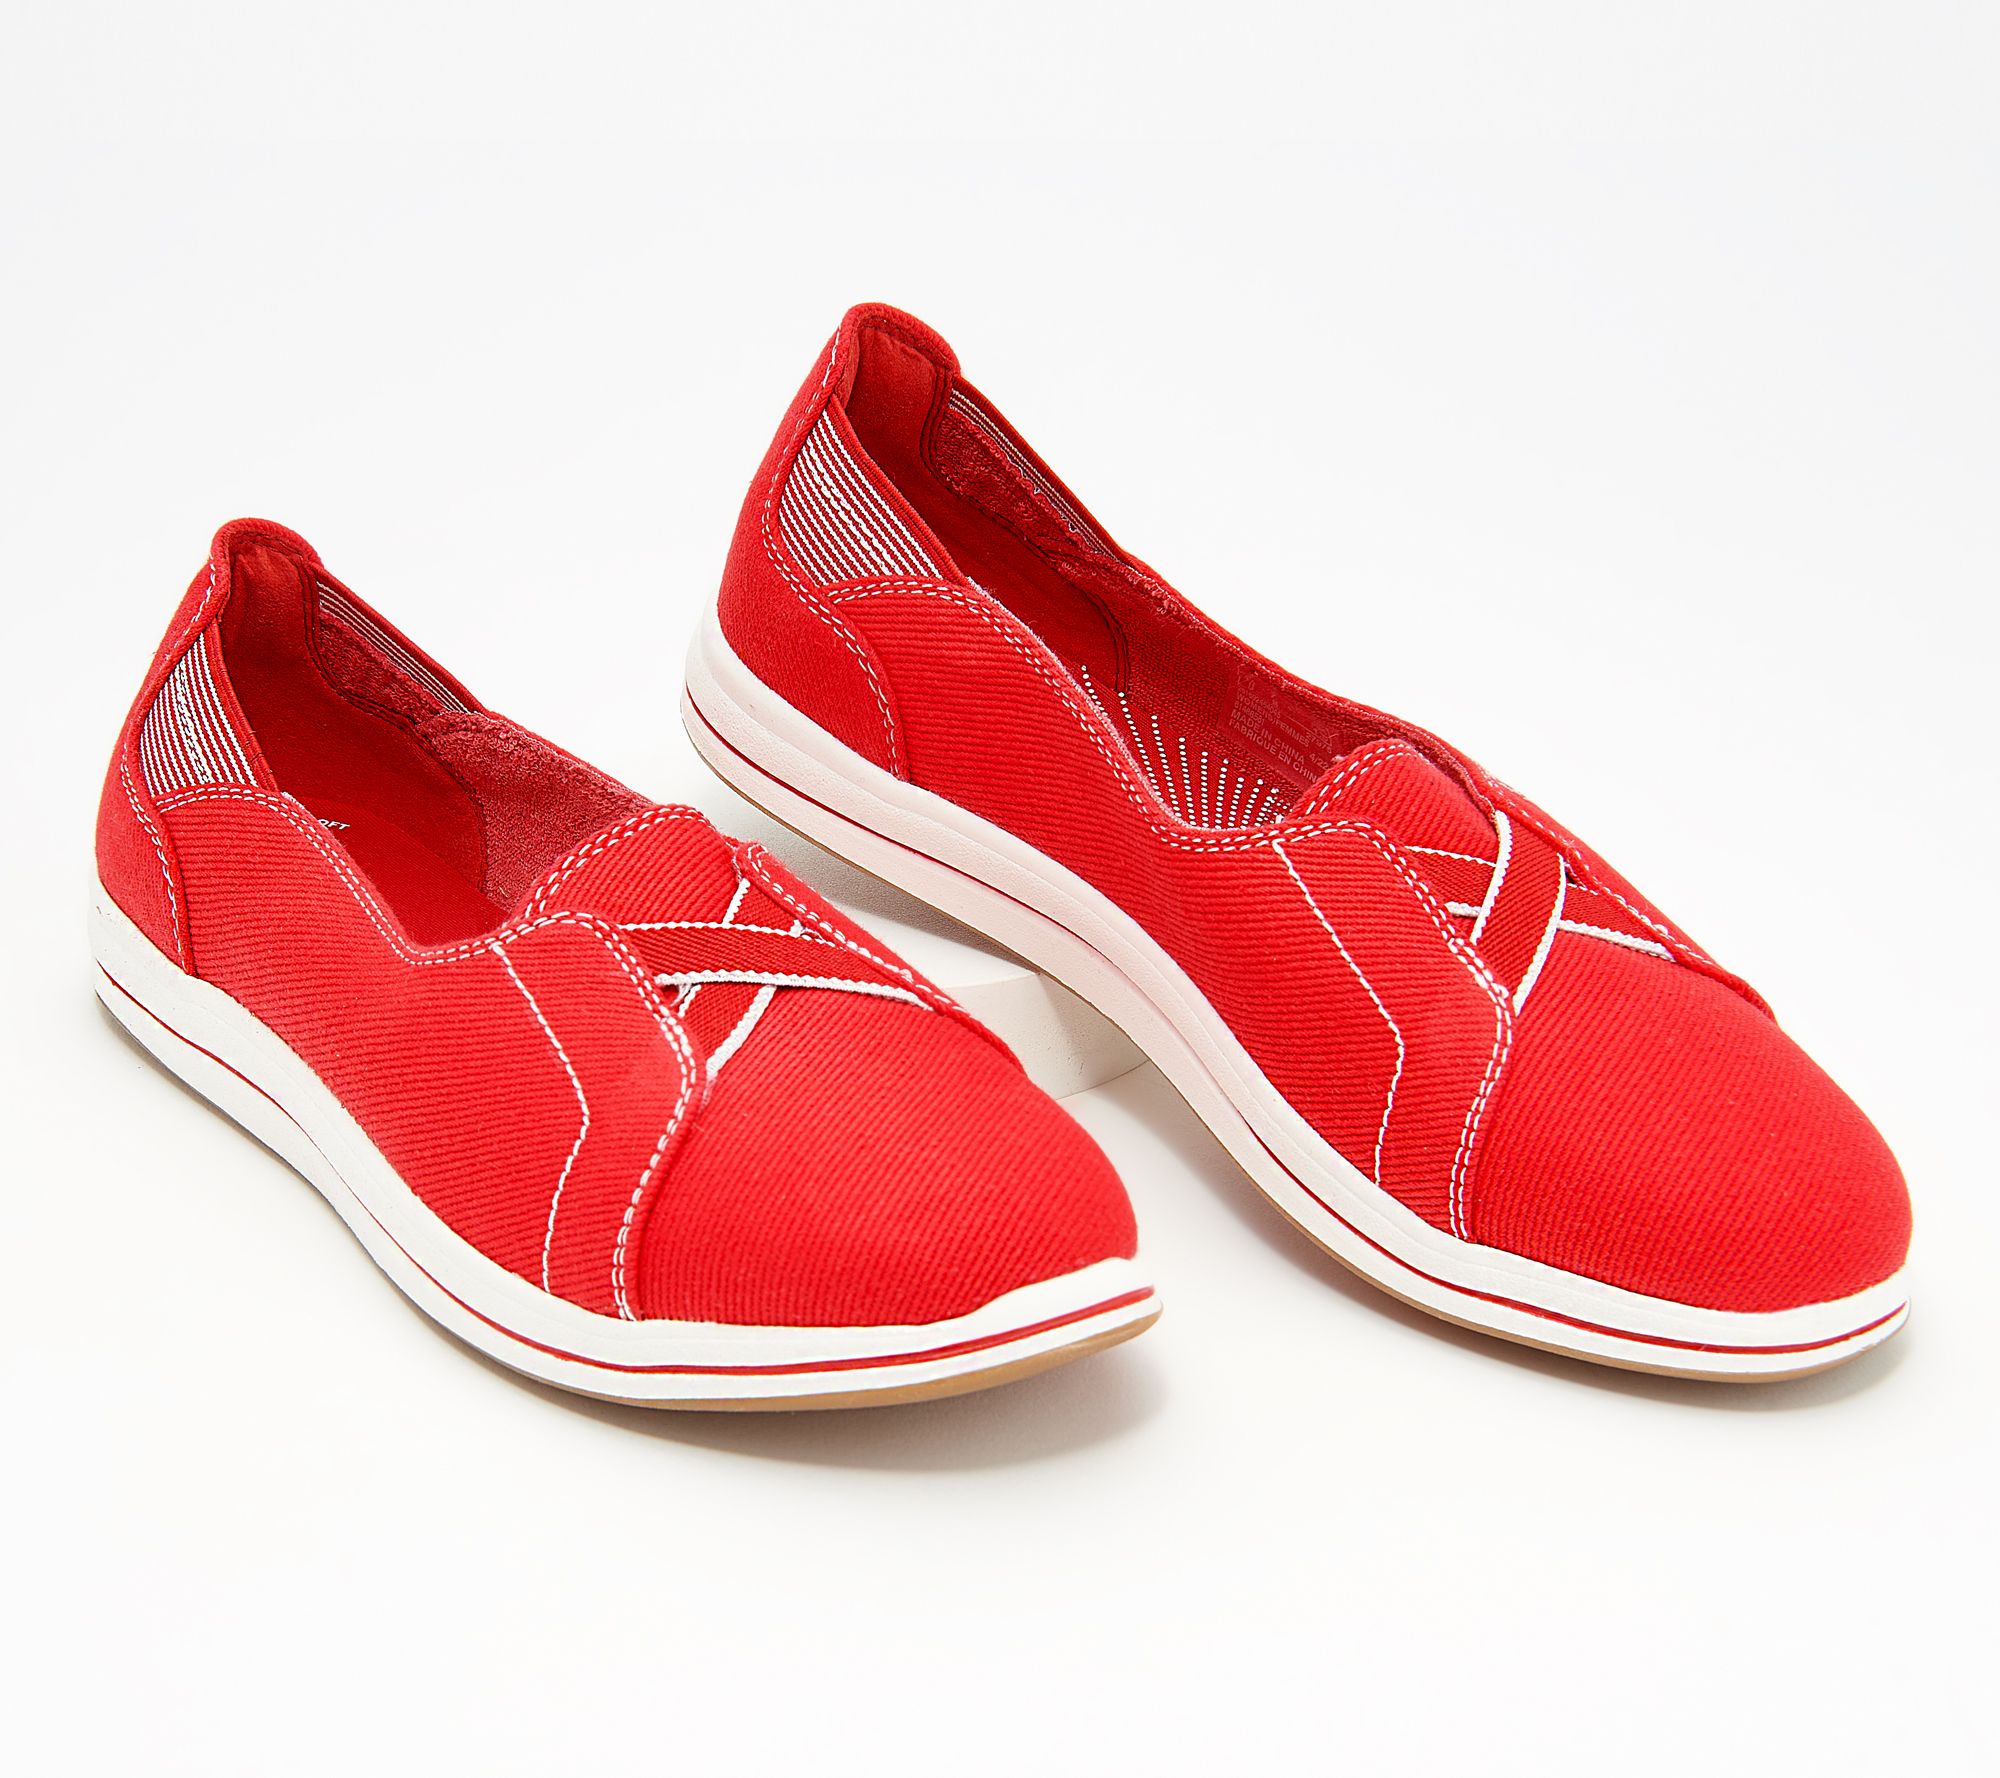 Women's Slip On Shoes & Sneakers - Canvas Slip Ons